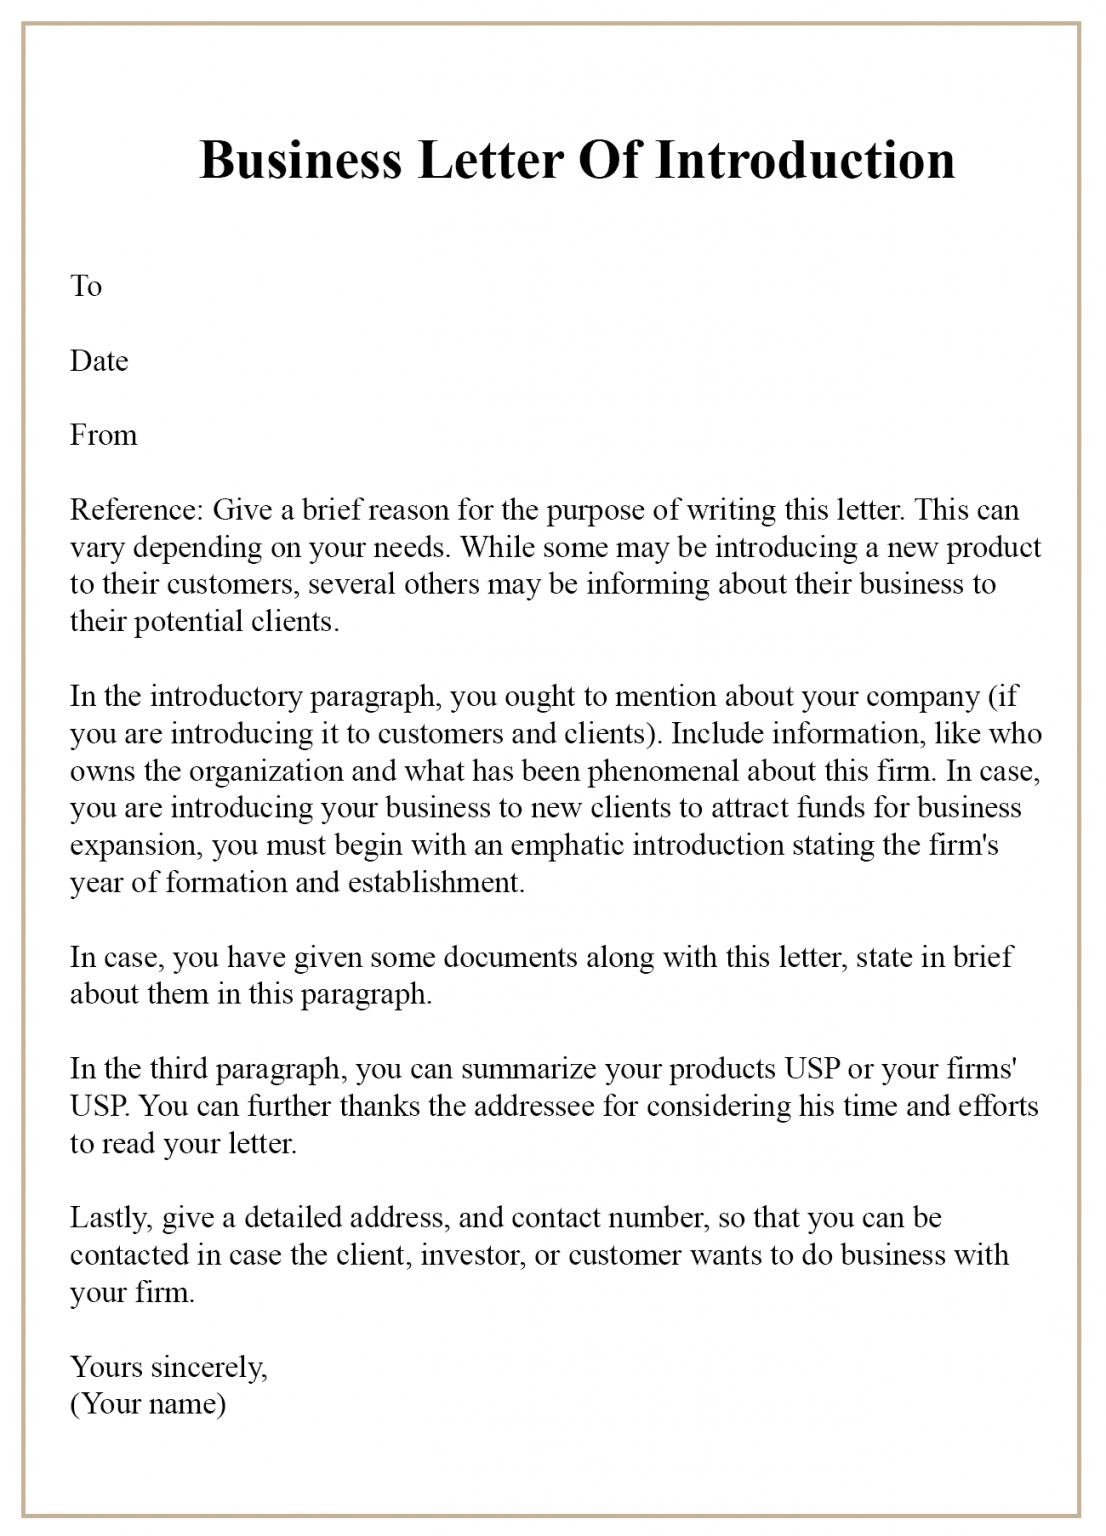 company introduction letter